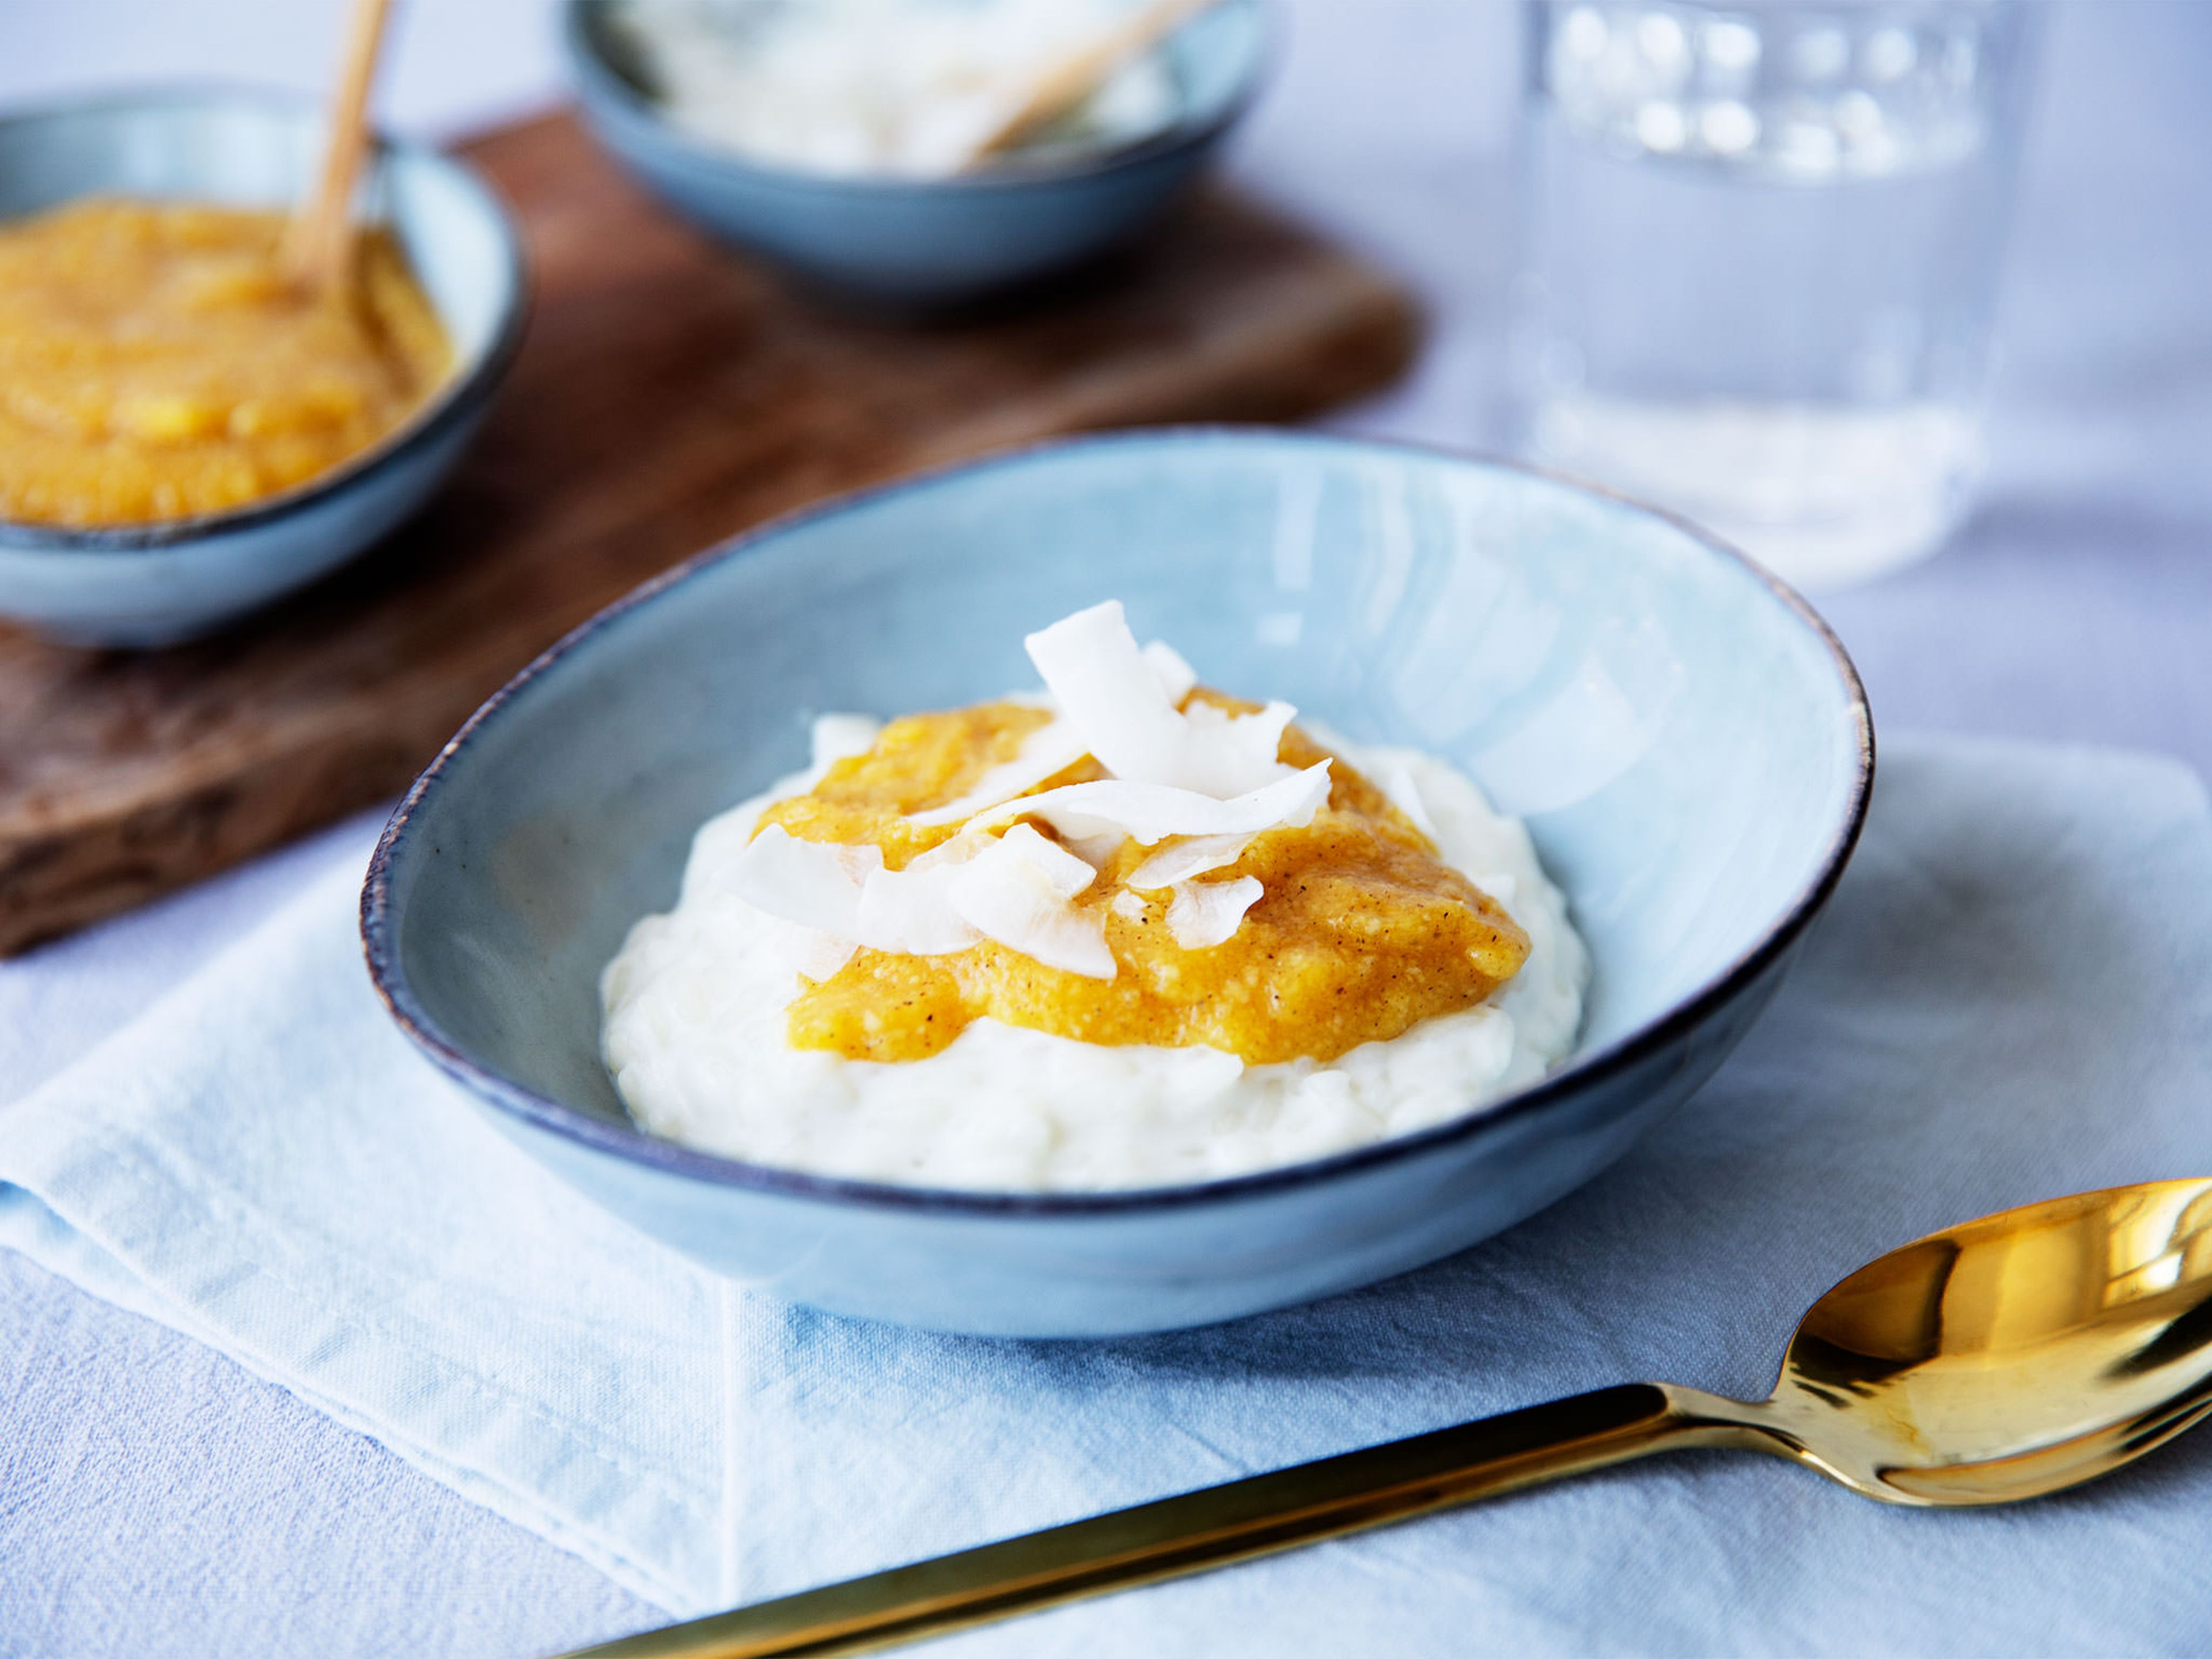 Coconut rice pudding with mango sauce